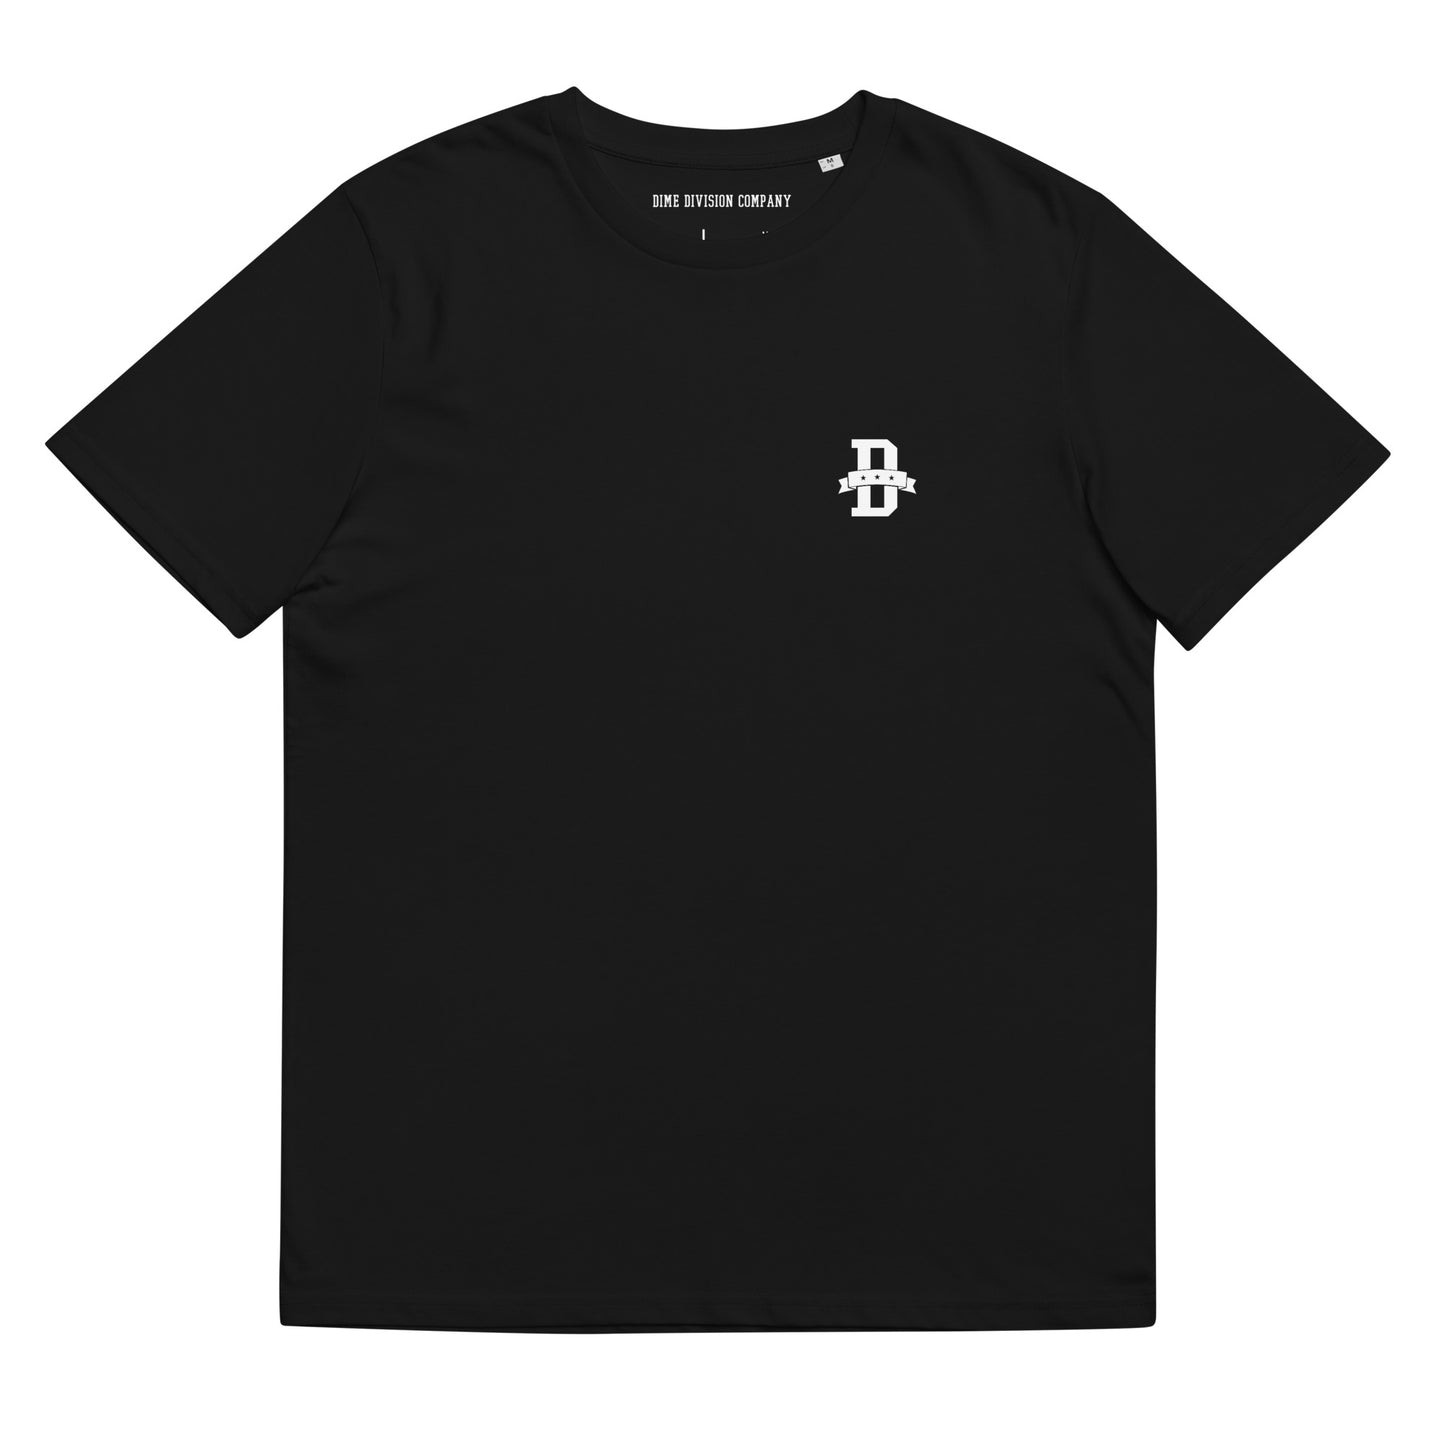 Just Another Day - SouthBay Premium Tee